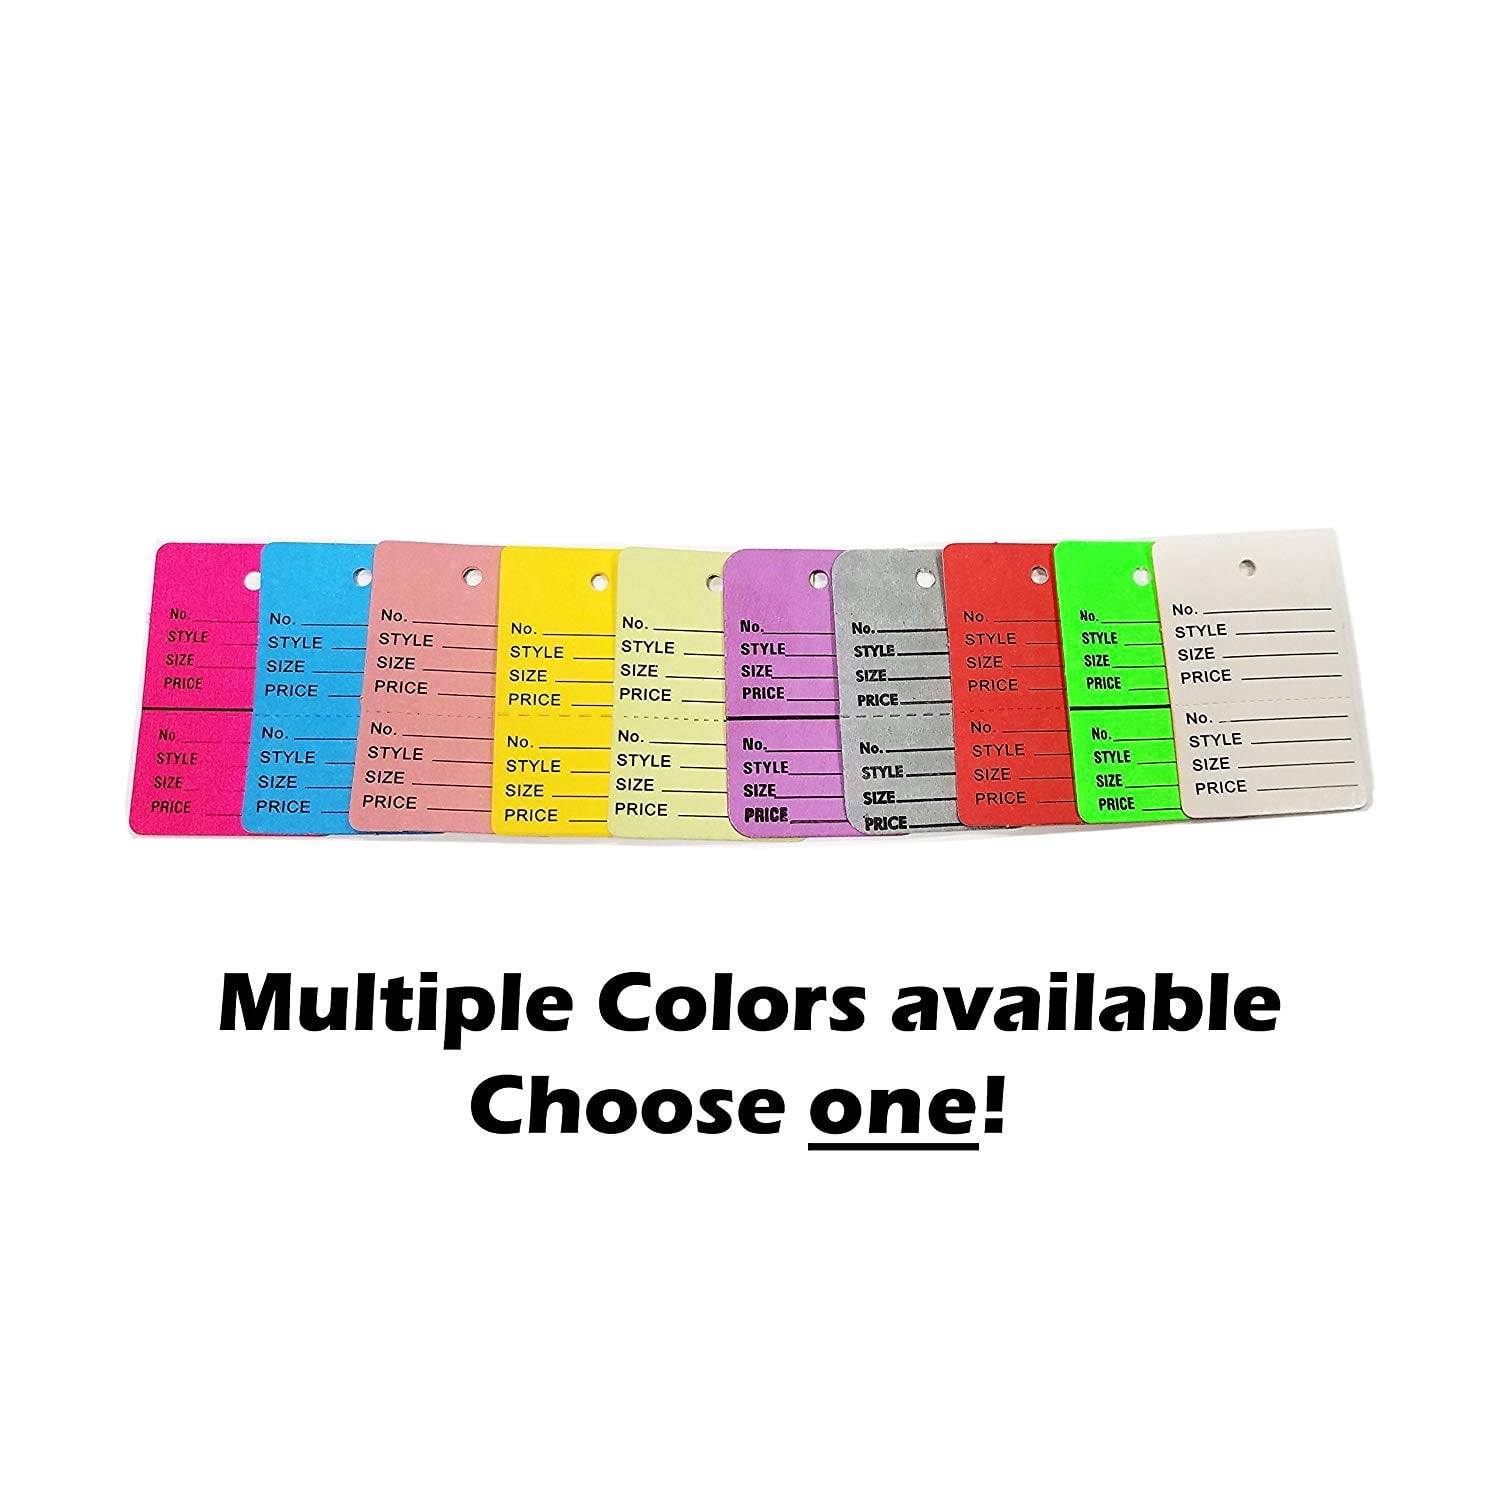 1000pcs Marking Perforated Price Tags Coupon Clothing Labels Merchandise Sales 